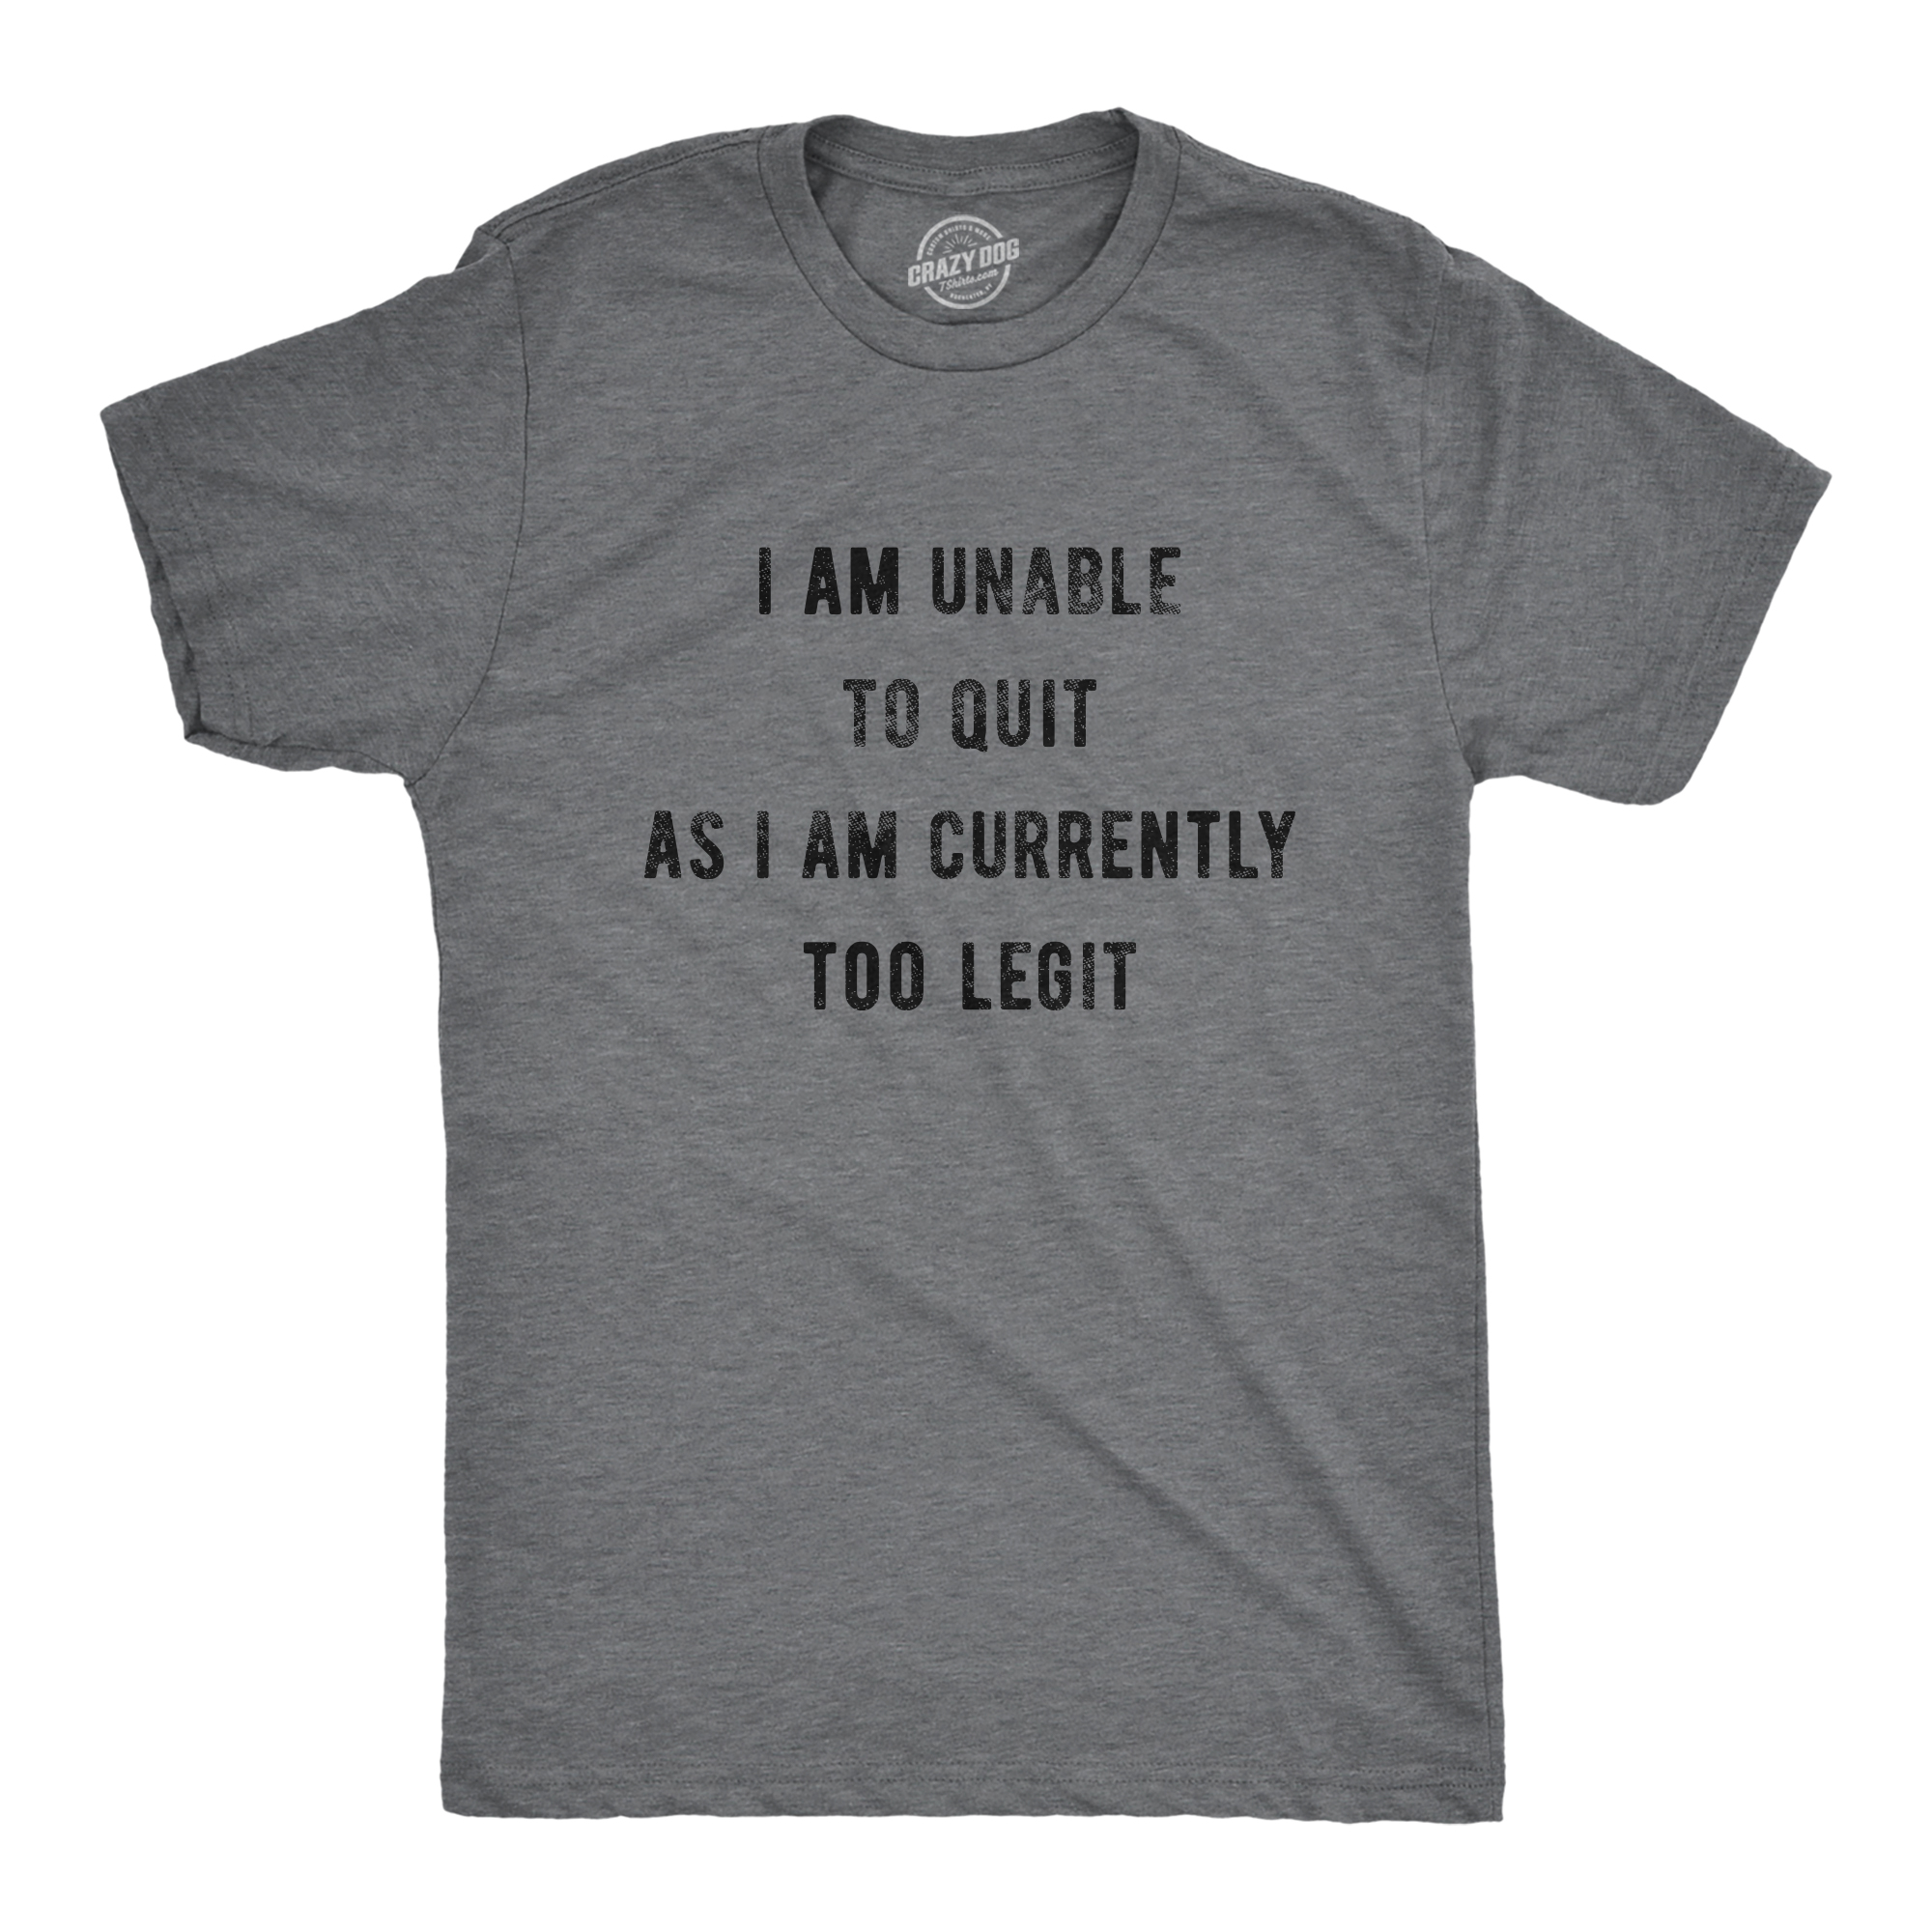 Crazy Dog Tshirts Mens I Am Unable To Quit As I Am Currently Too Legit Tshirt Funny Song Sarcastic Graphic Tee